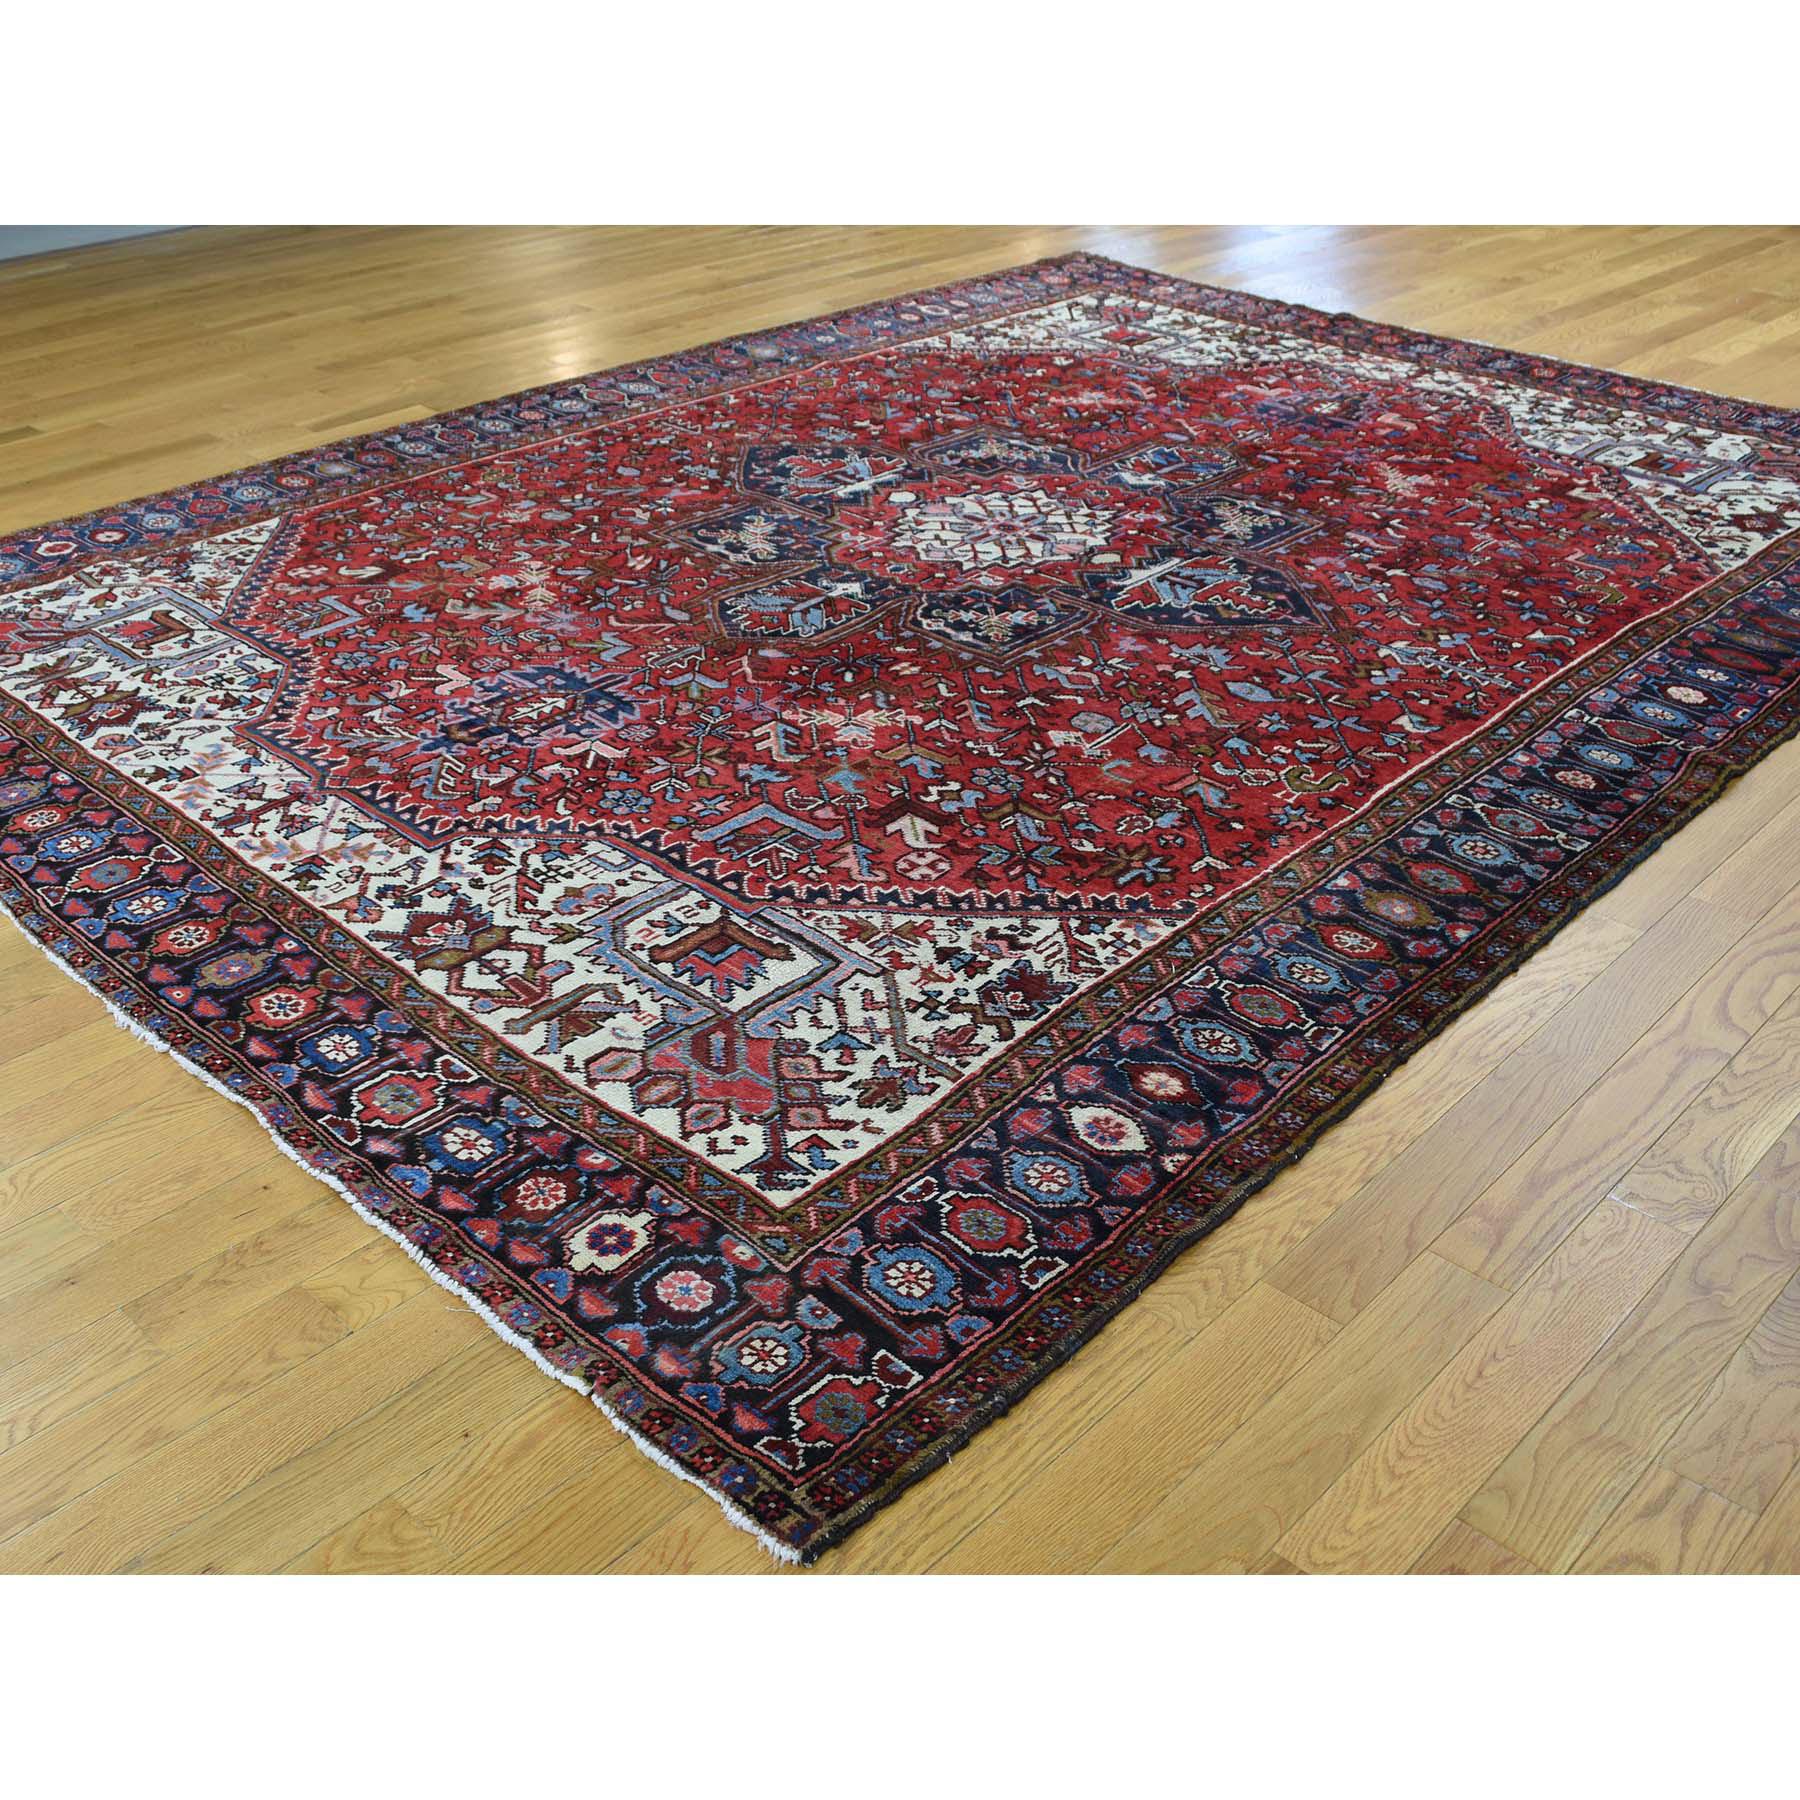 Other Excellent Condition Semi Antique Persian Heriz Hand Knotted Rug